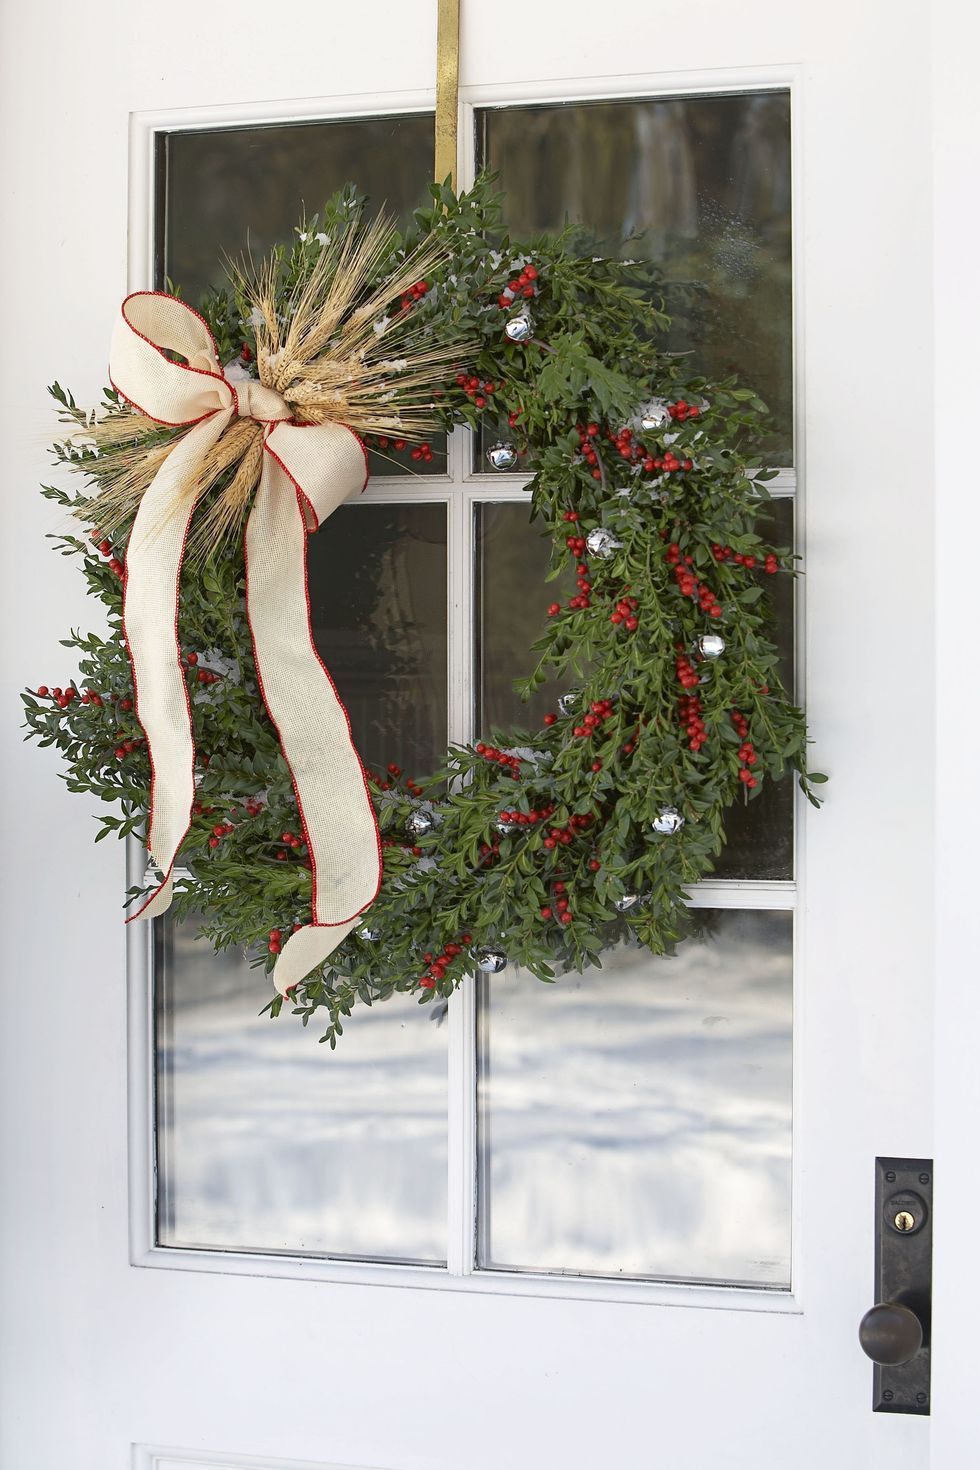 Christmas Decoration with Front Door Xmas Hanging Decoration for Living Room Bedroom Office Front Door Window Hanging Christmas Garland Simulation Wreath